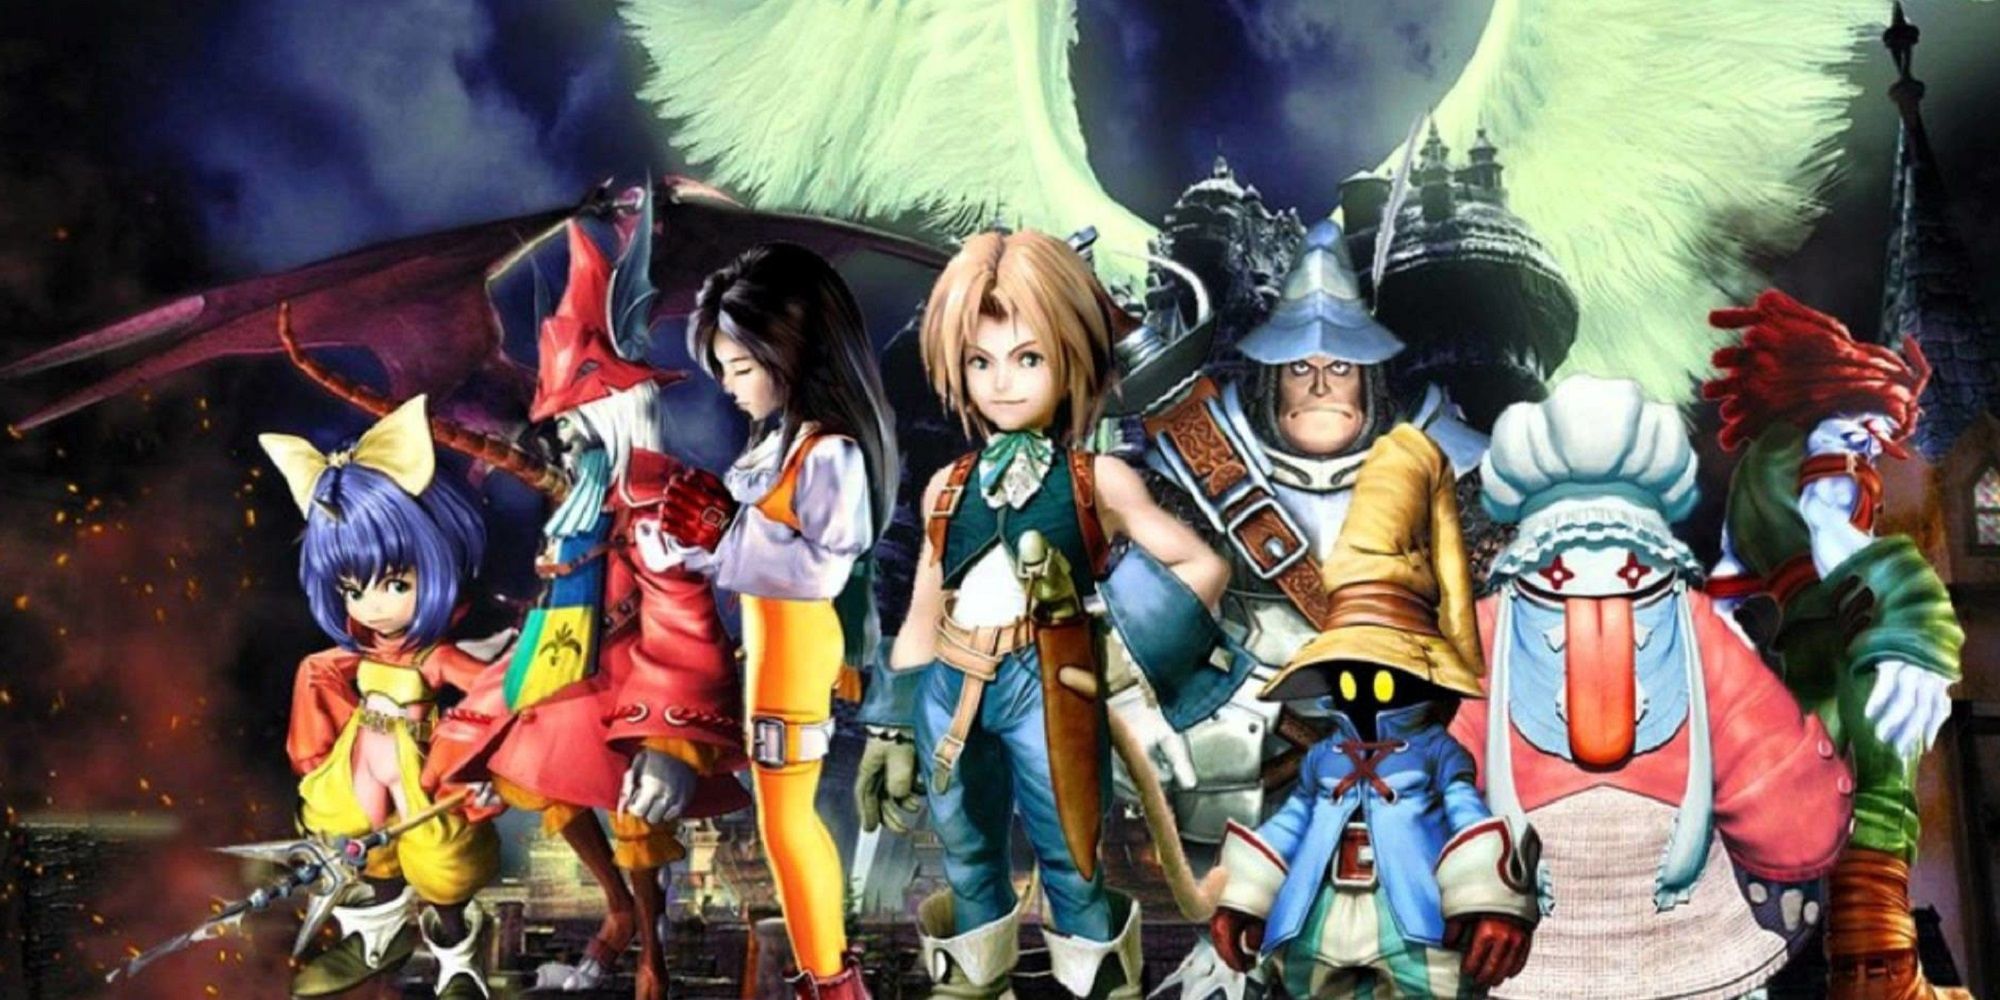 The Final Fantasy IX animated series is finally being shown at a tradeshow